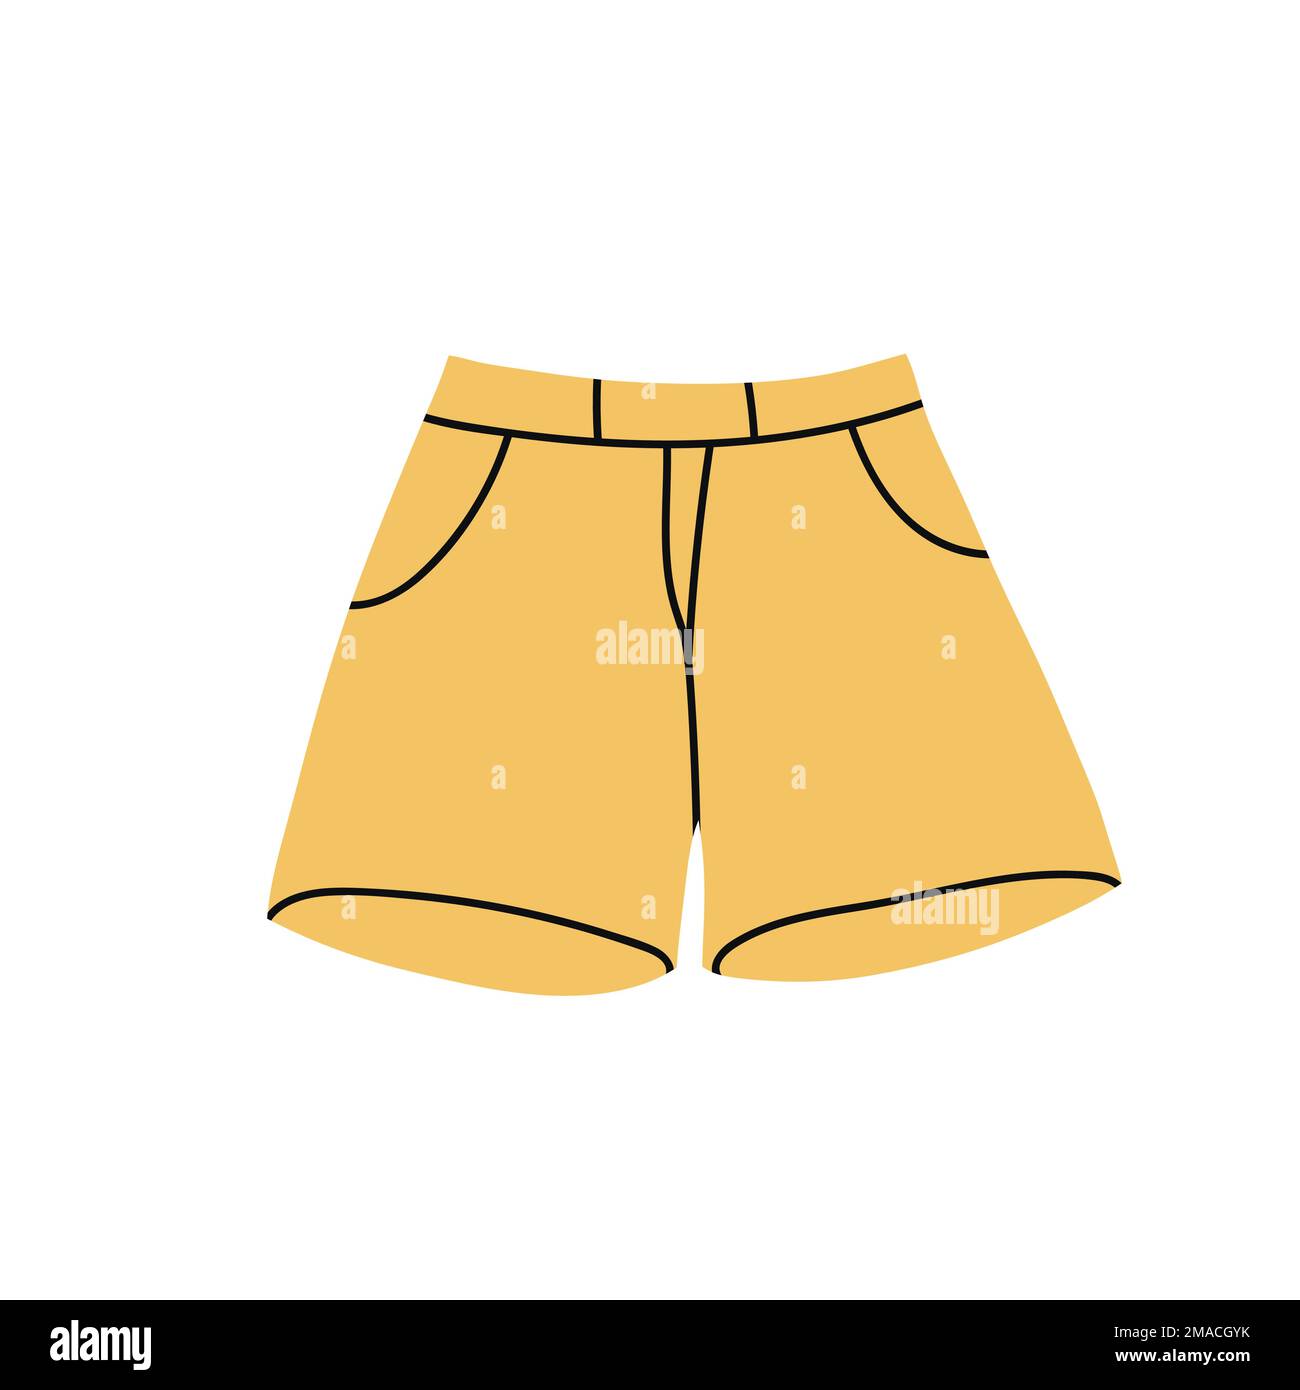 Sports shorts. Modern clothing for men and women. Flat vector illustration isolated on white background Stock Vector